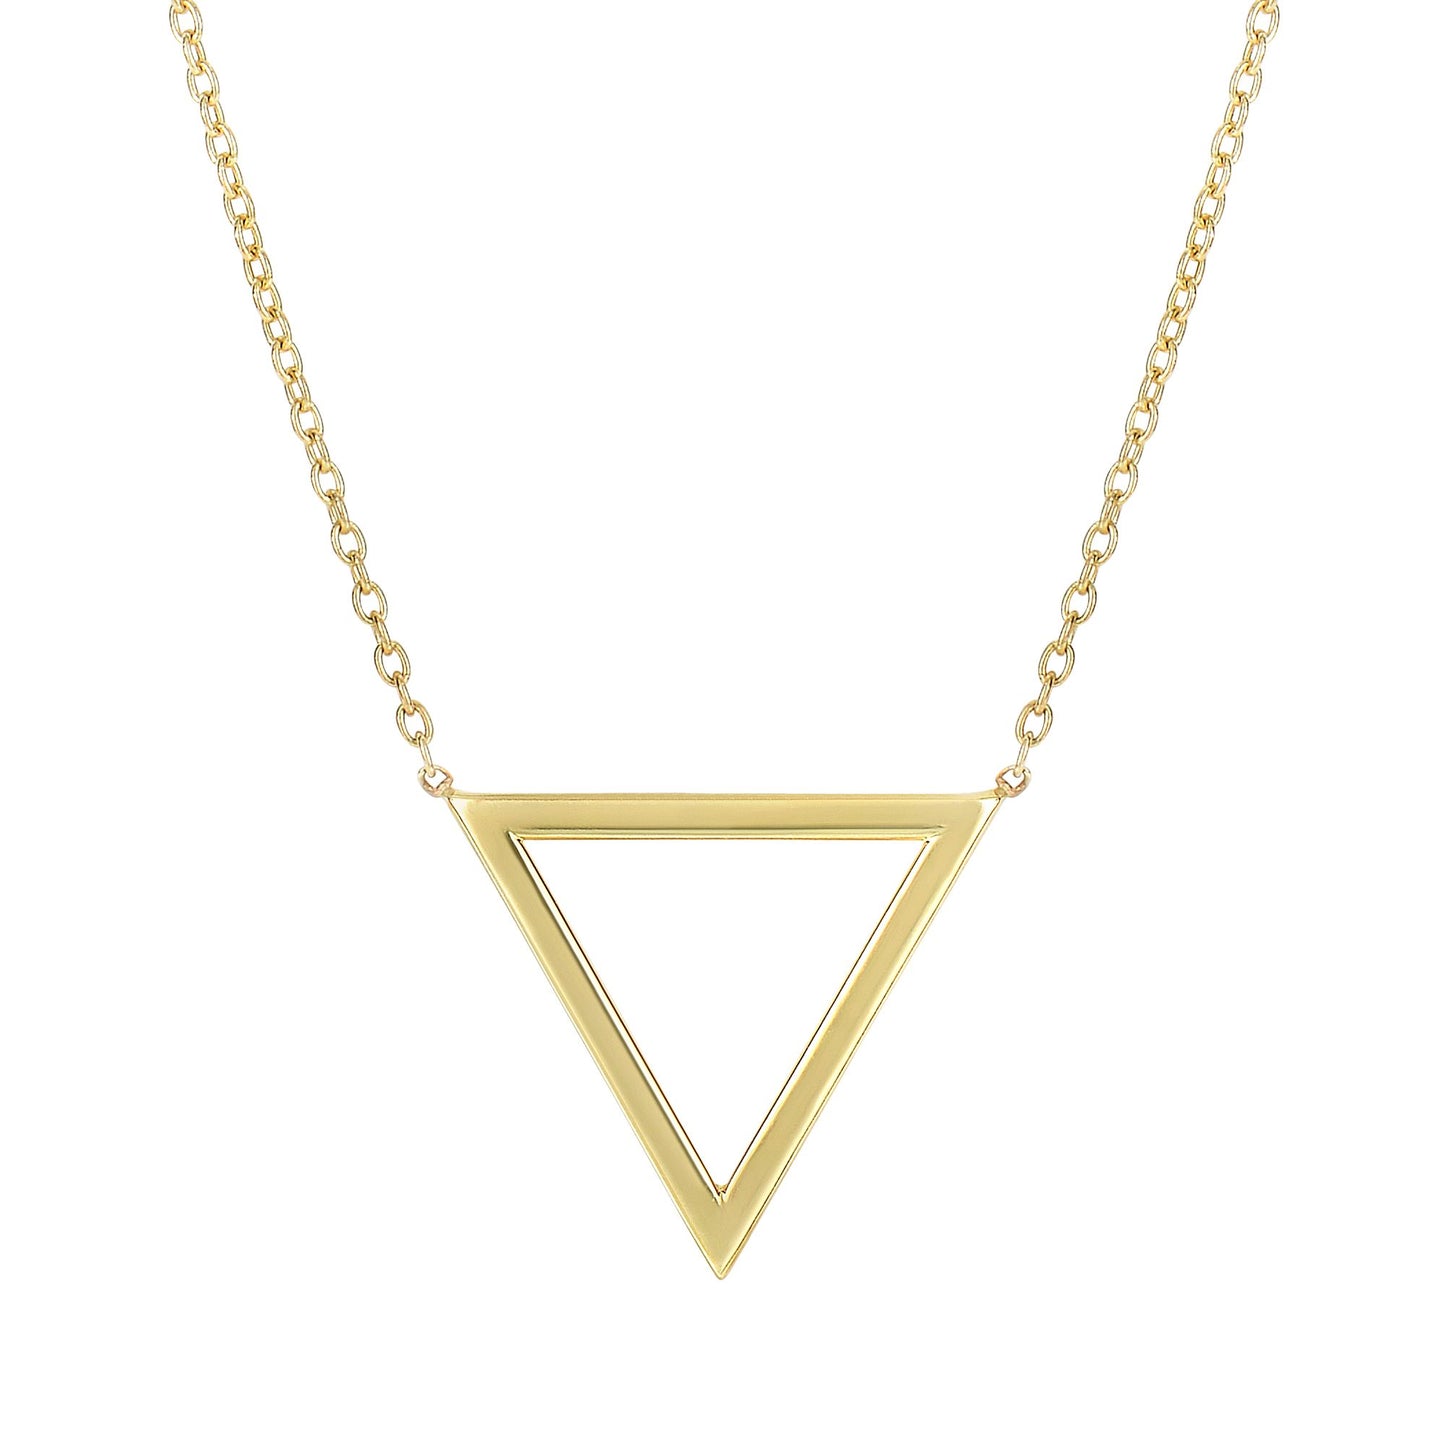 High Polished 14K Gold Triangle Charm Pendant Necklace